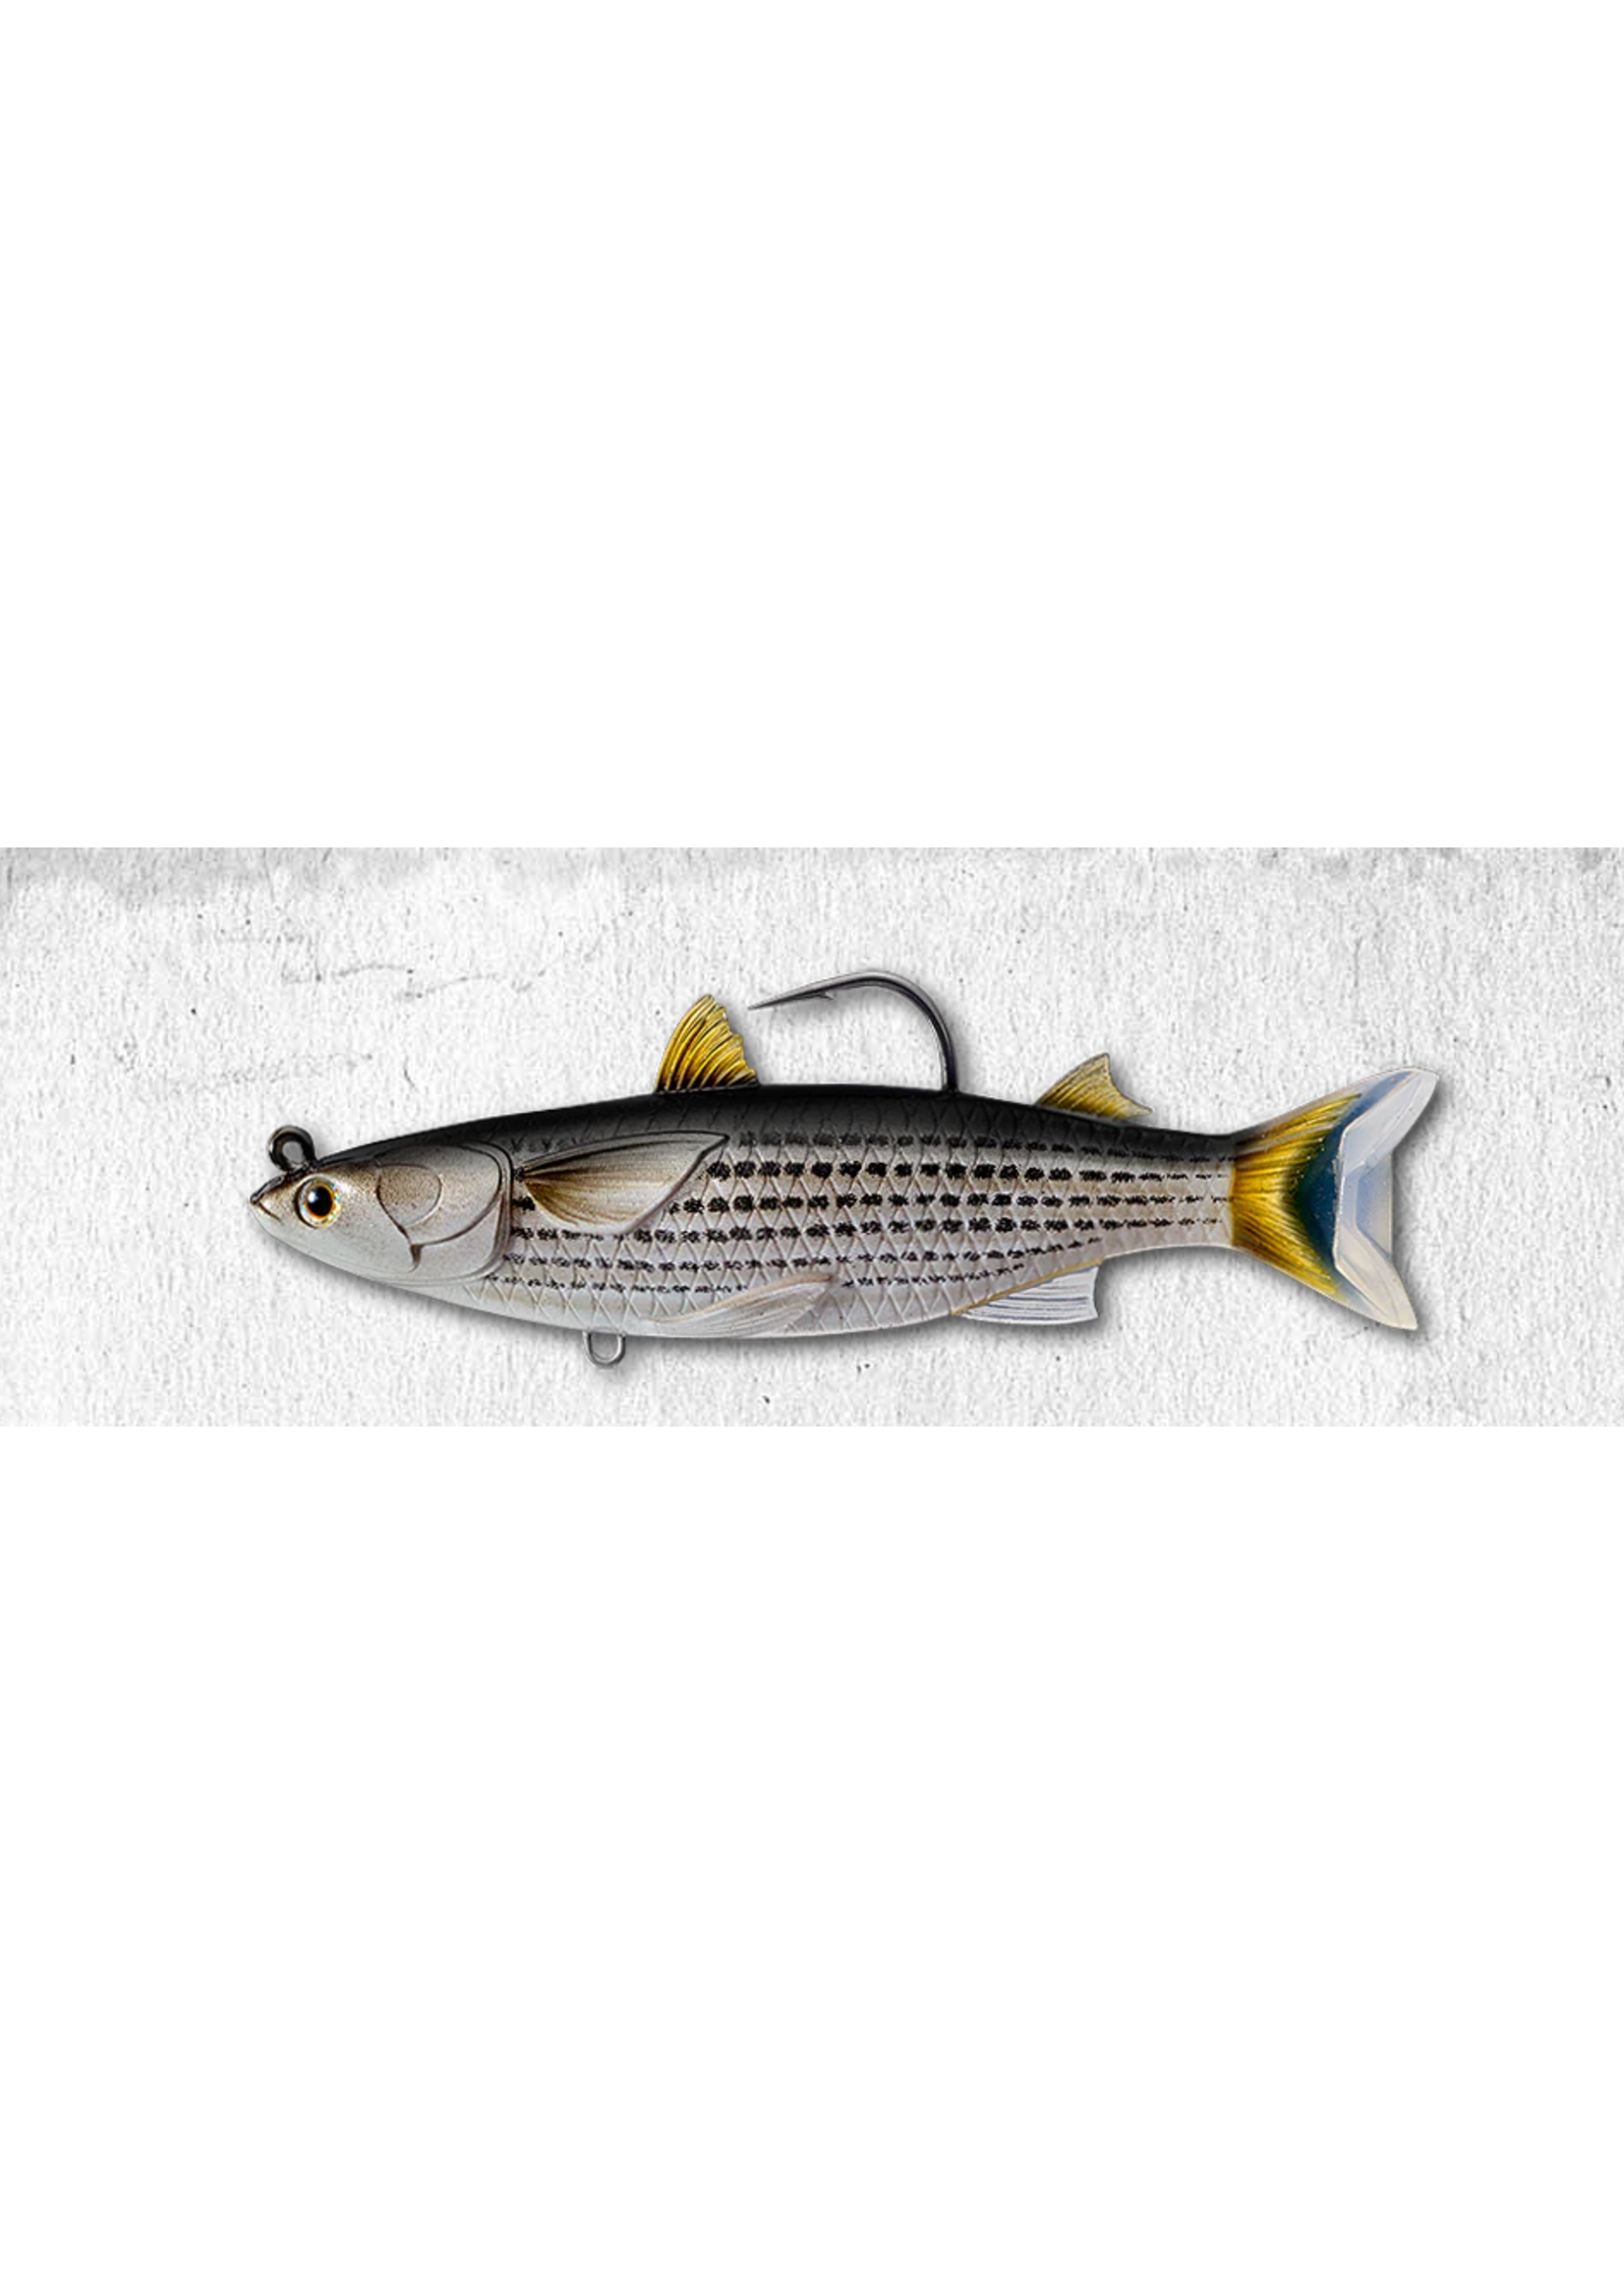 Mullet Swimbait - 4.5 Silver / Black - Brothers Outdoors LLC